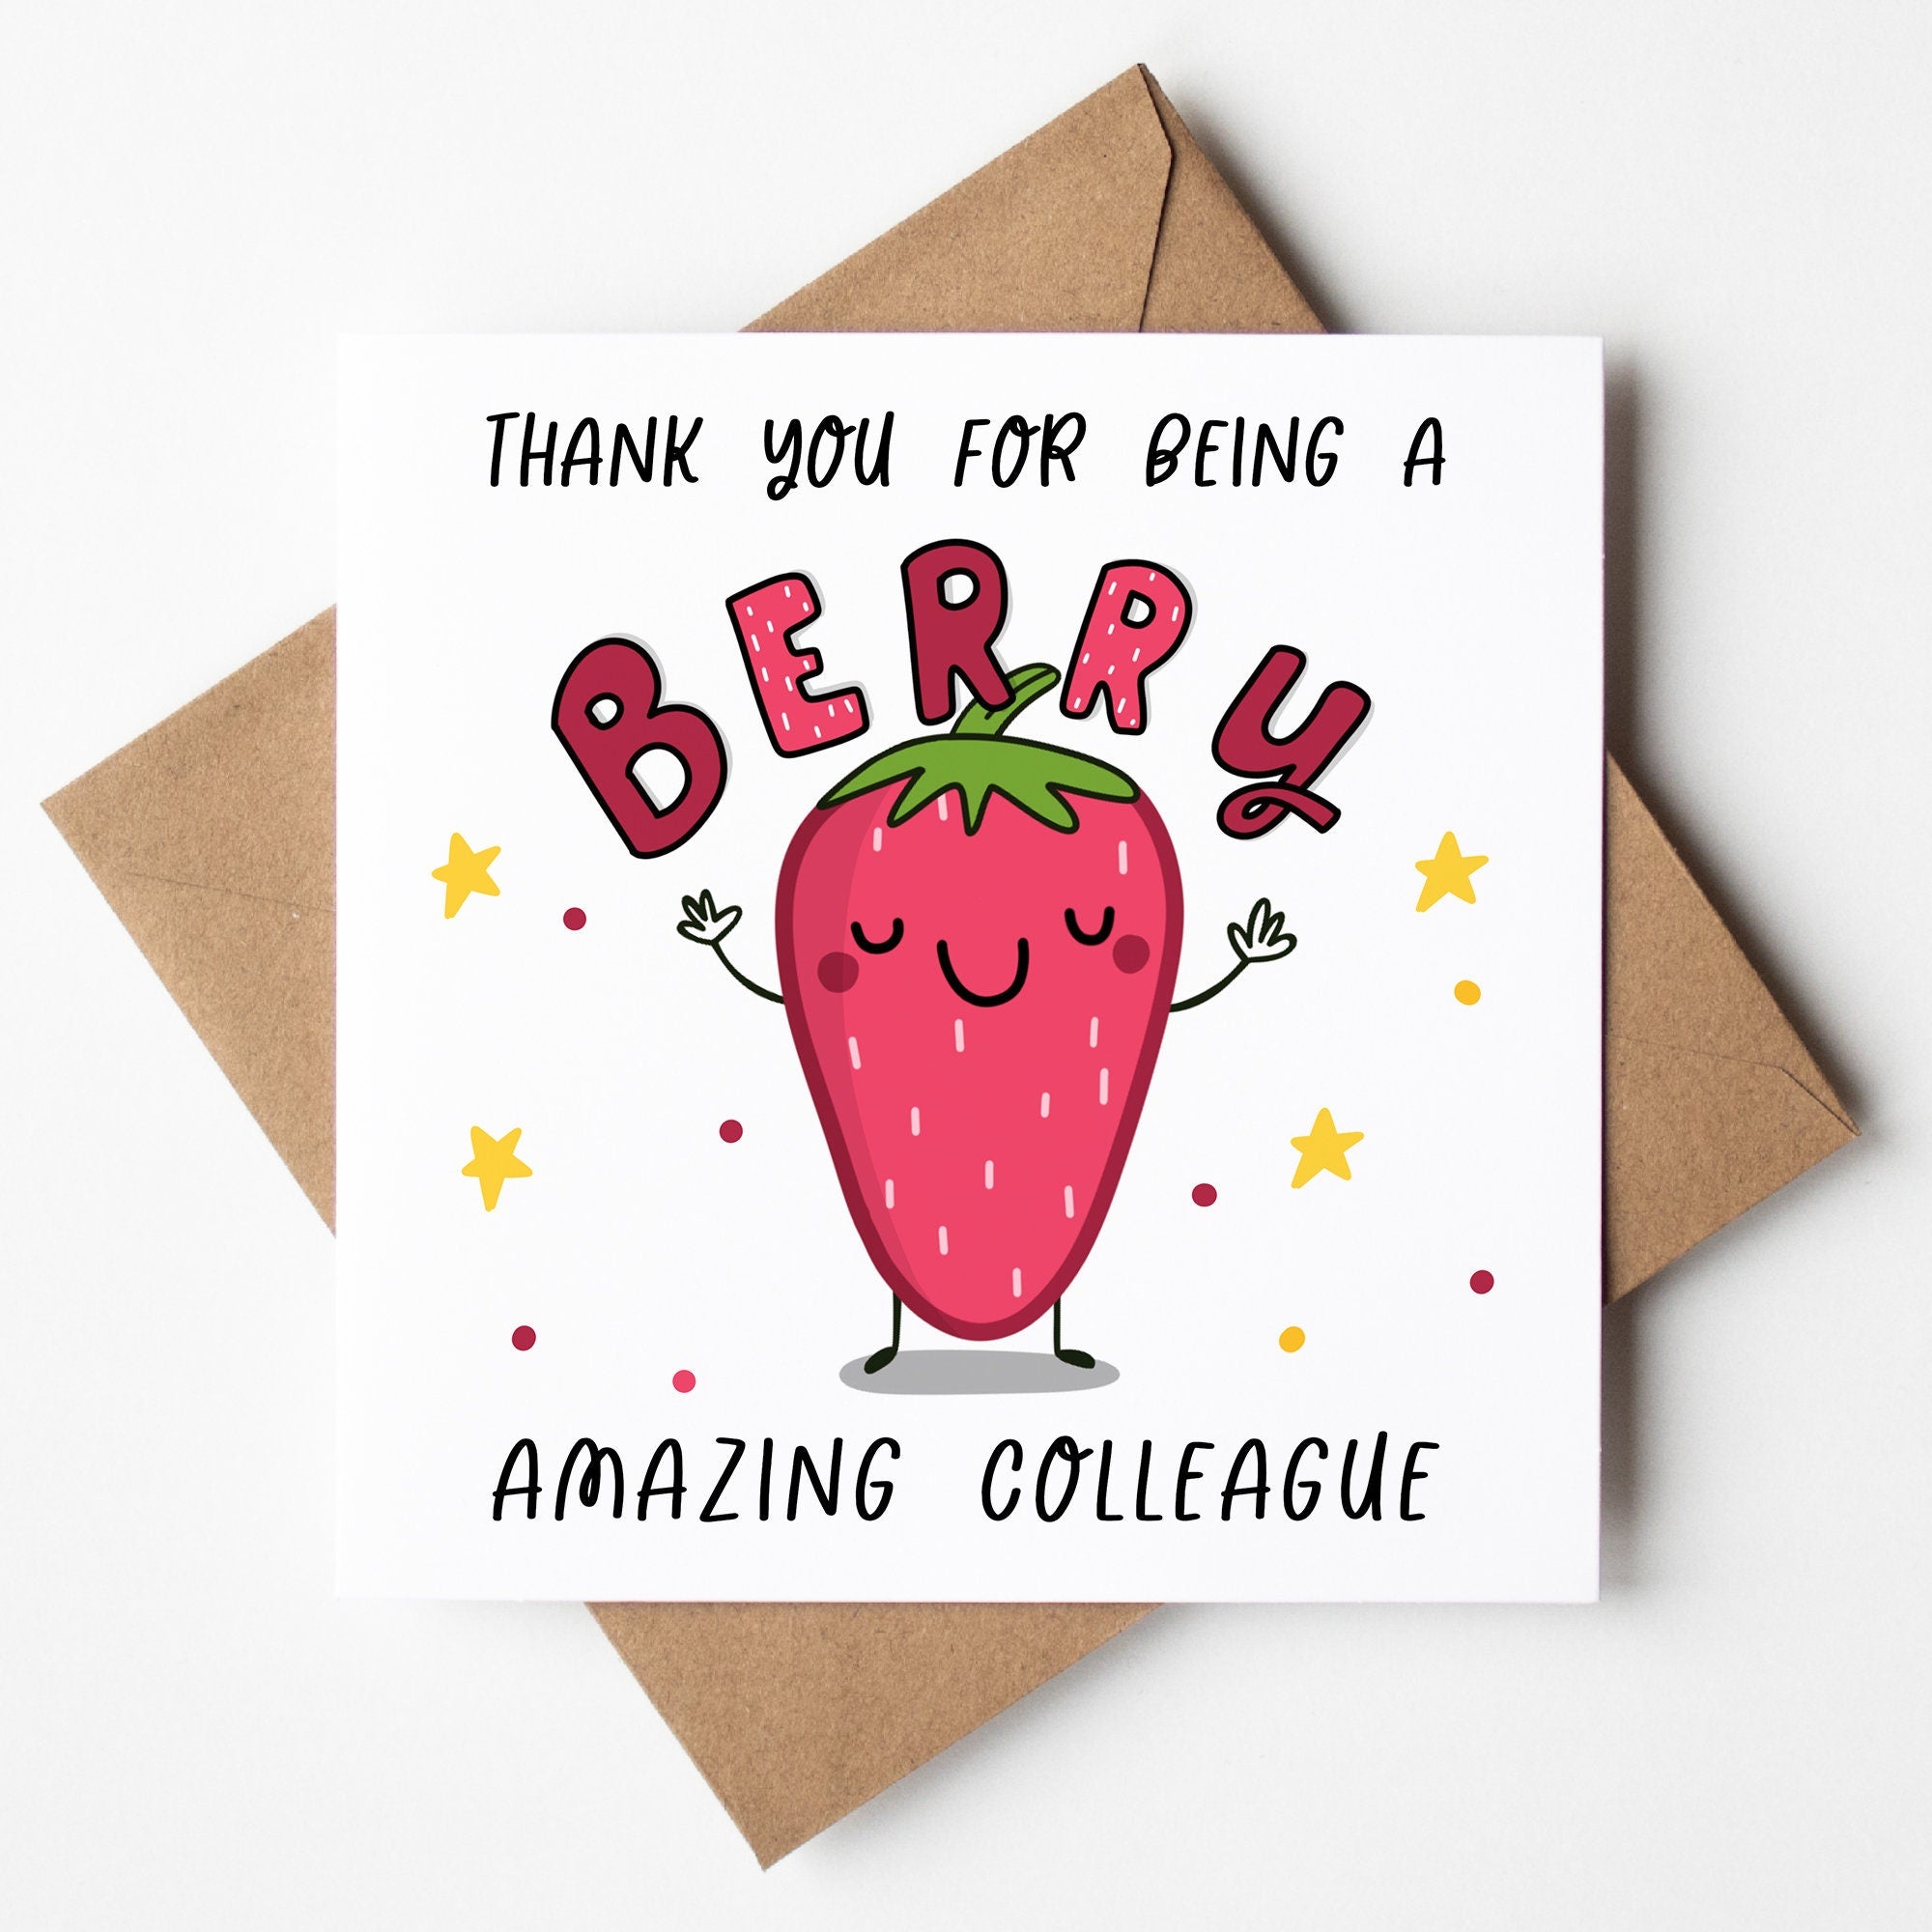 Coworker Thank You Card, Work Bestie, Colleague Card, Appreciation, Gift To Say Thanks, Friendship Gift, Cute,  Good Luck